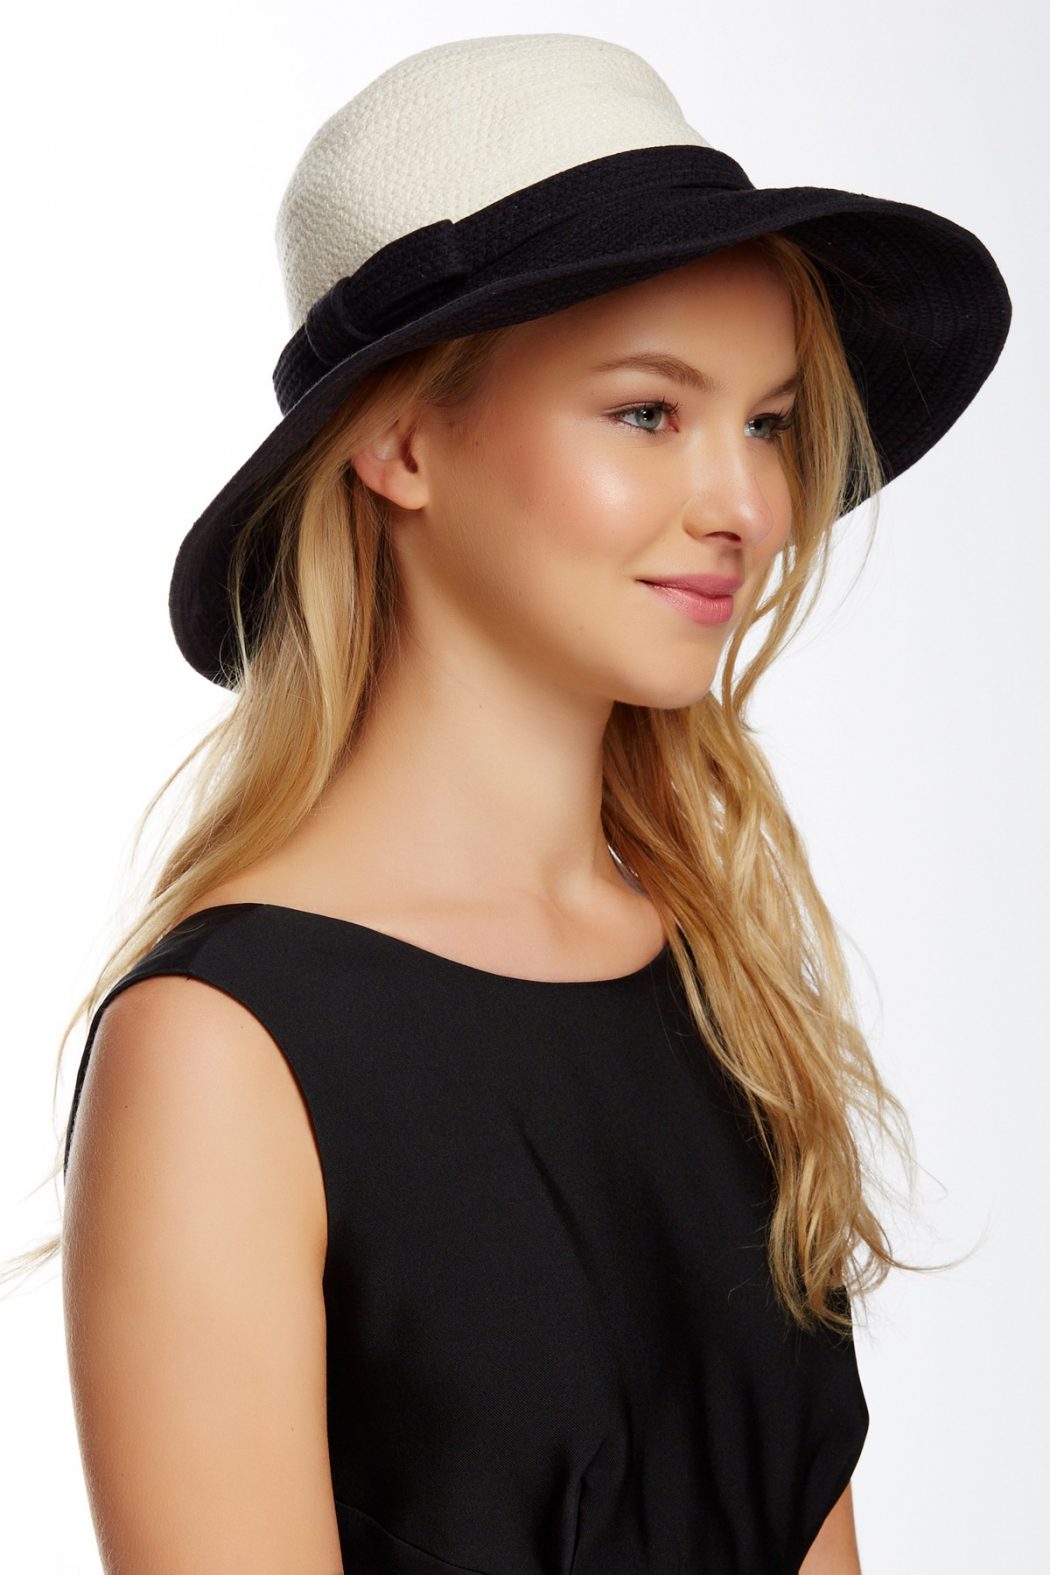 Color Blocking Sun Hat4 10 Women’s Hat Trends For Summer - 33